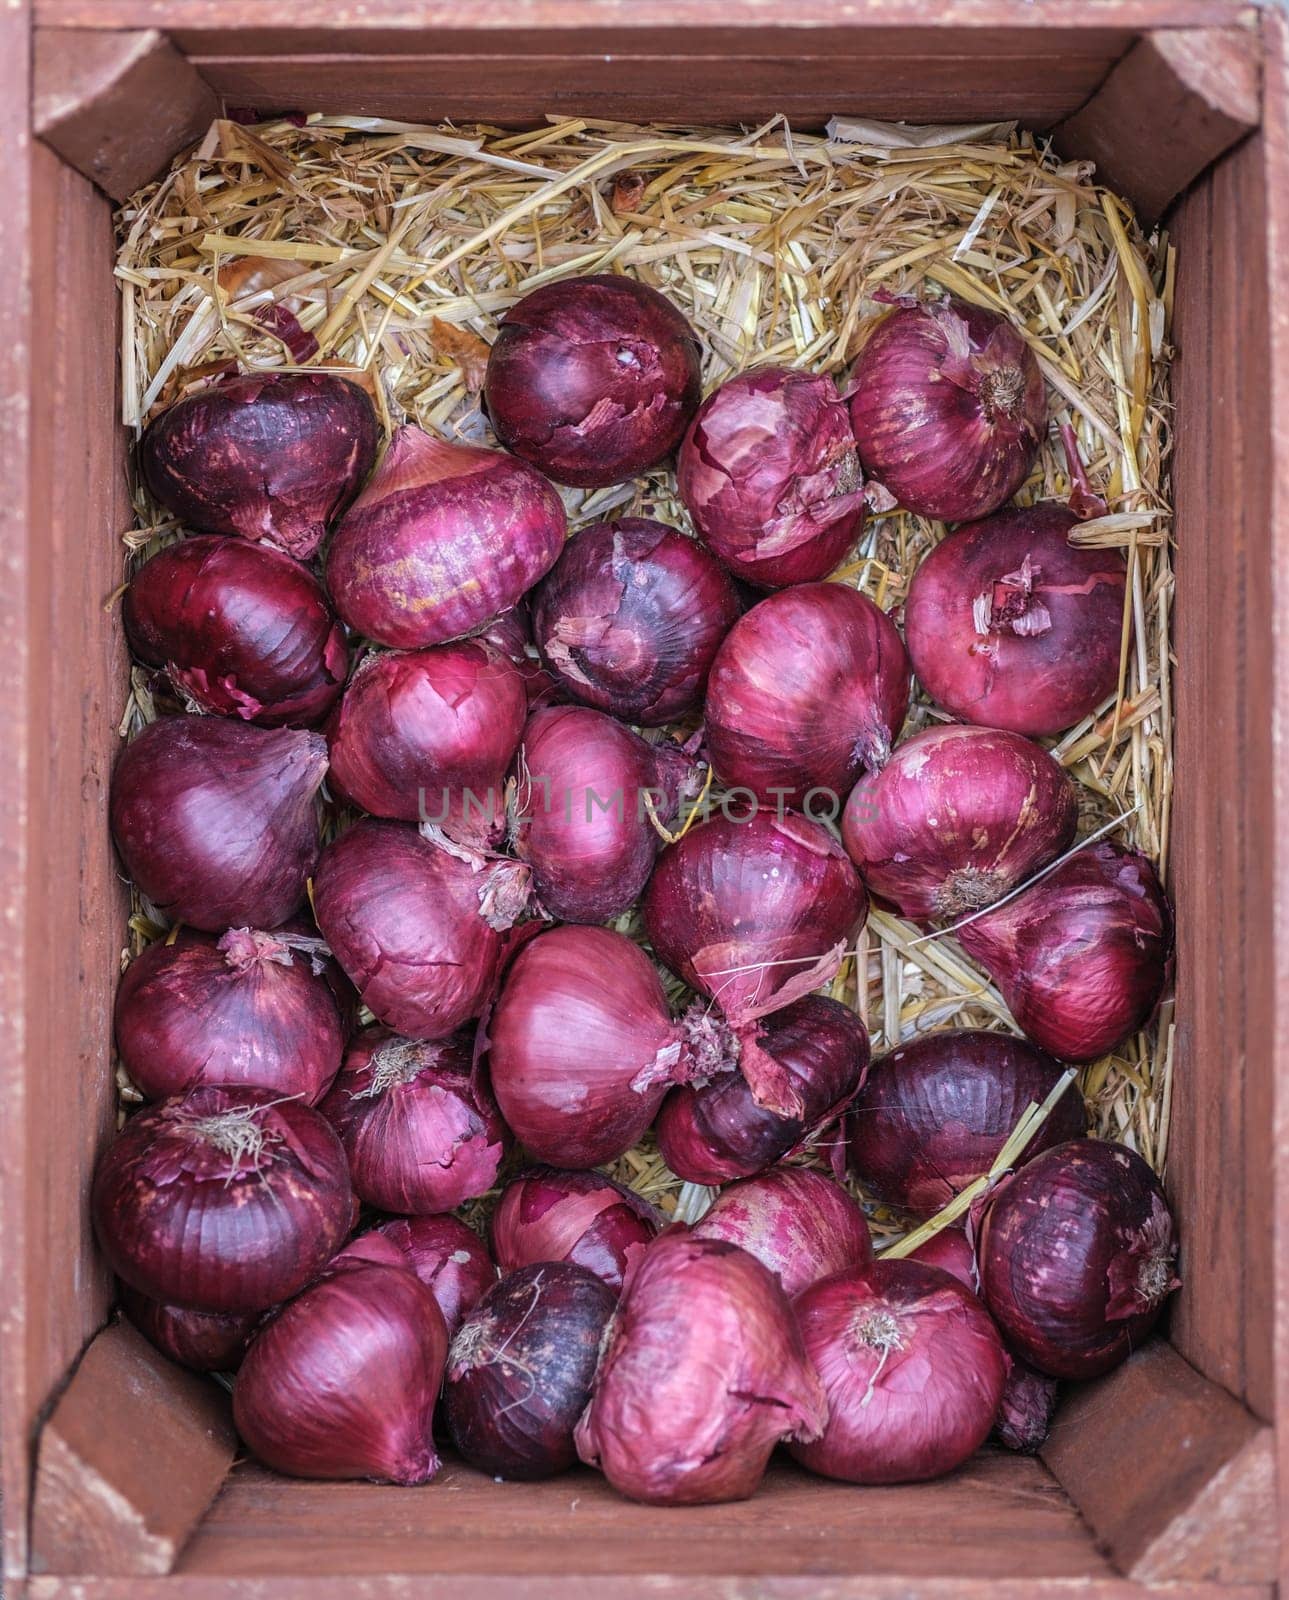 Box Of Red Onions At A Market by mrdoomits